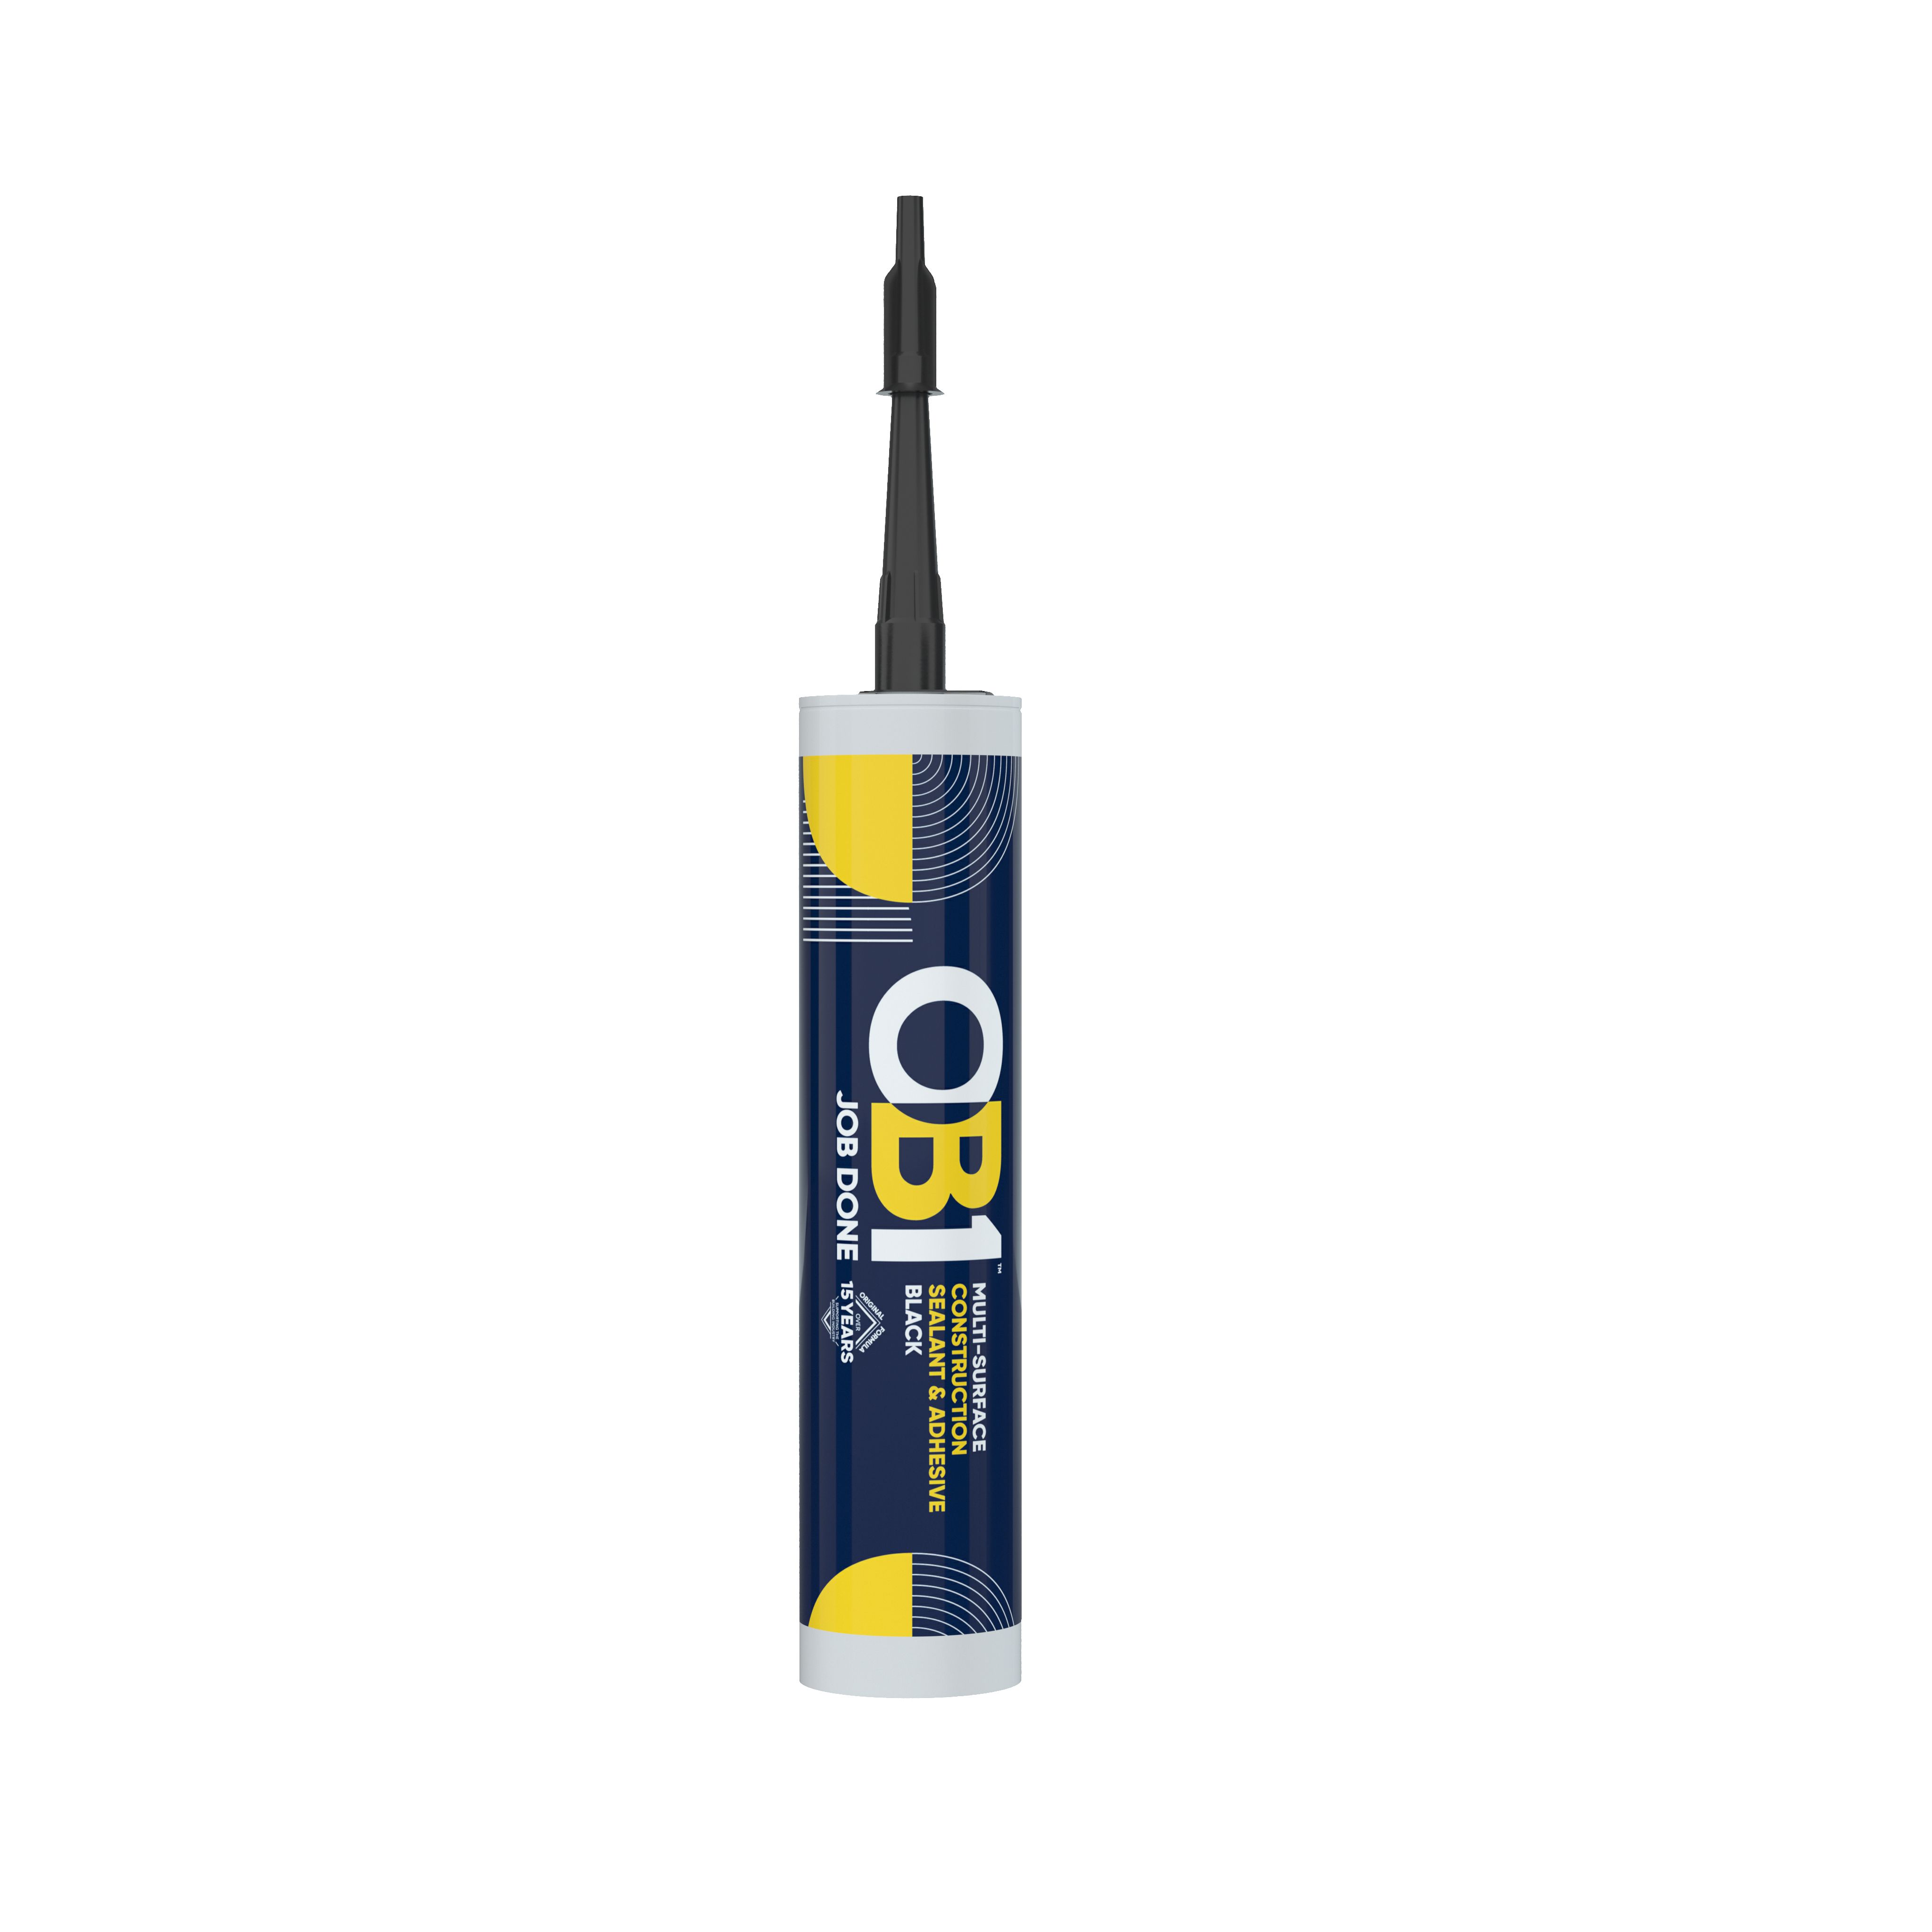 No Nonsense Ready to use All weather Clear Sealant, 310ml